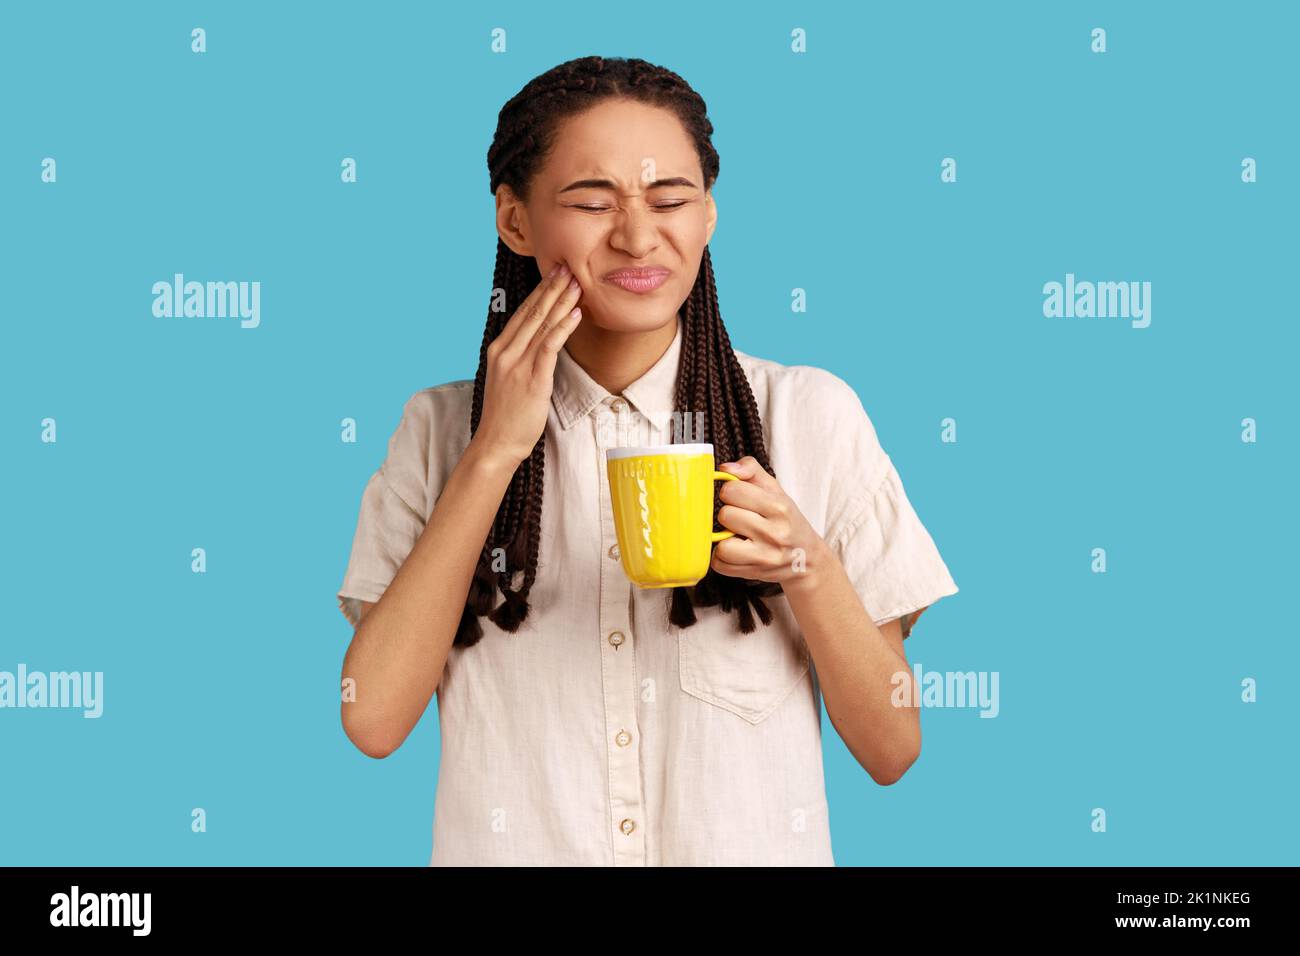 Portrait of unhealthy woman with black dreadlocks wearing white shirt. holding cup in hands, having tooth pain after drinking cold or hot beverage. Indoor studio shot isolated on blue background. Stock Photo